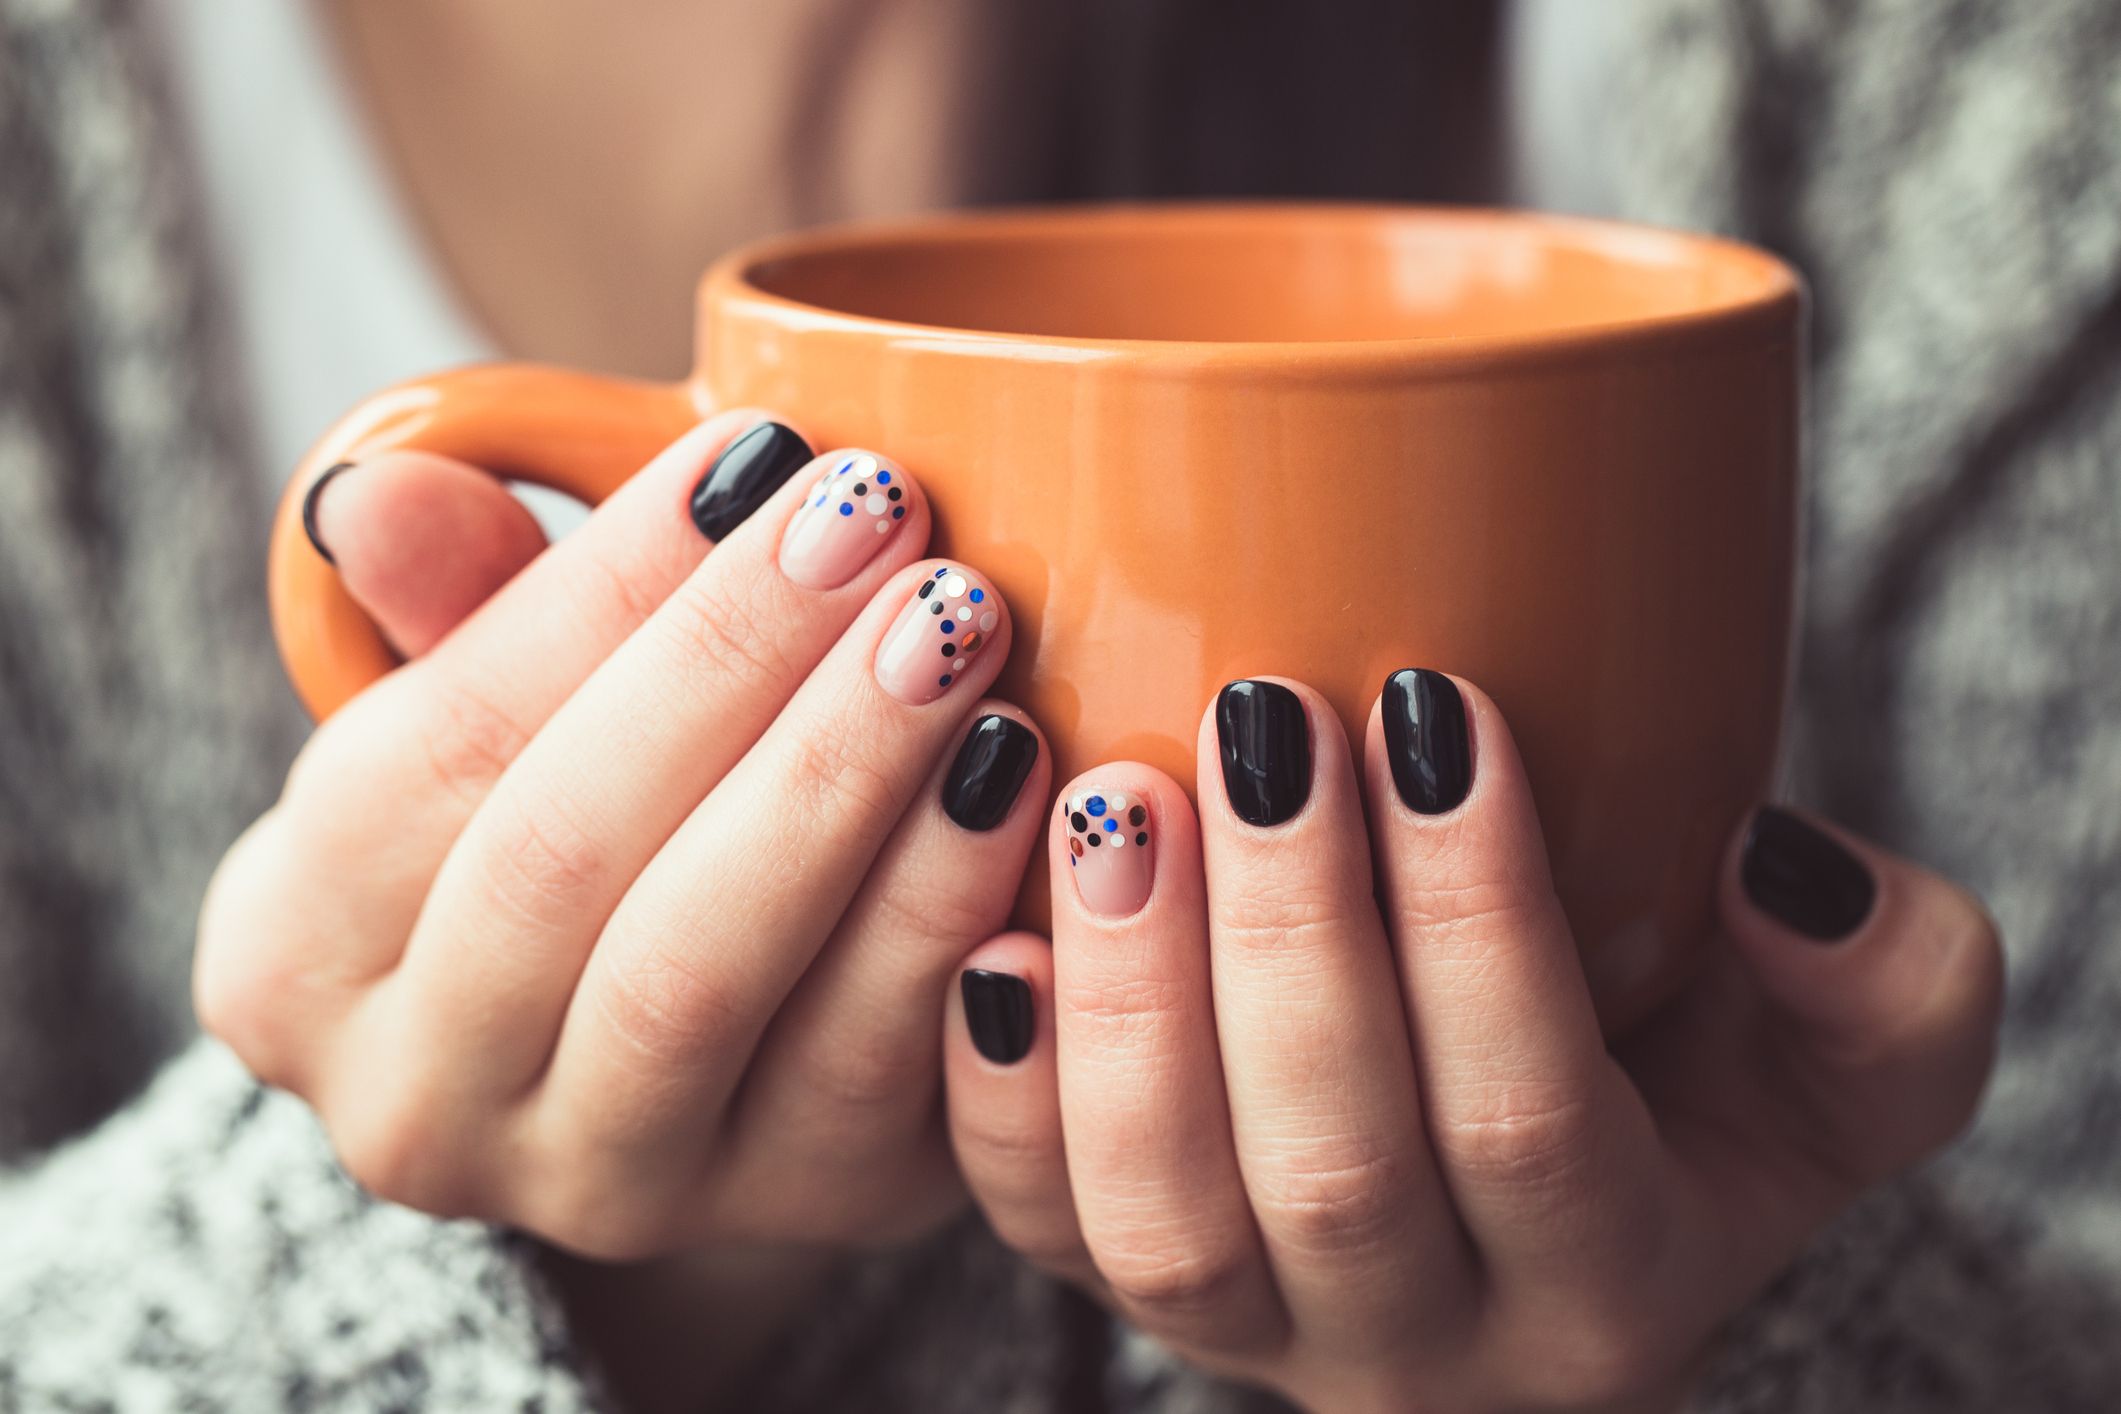 7. "Thanksgiving Nail Colors for Short Nails" - wide 3